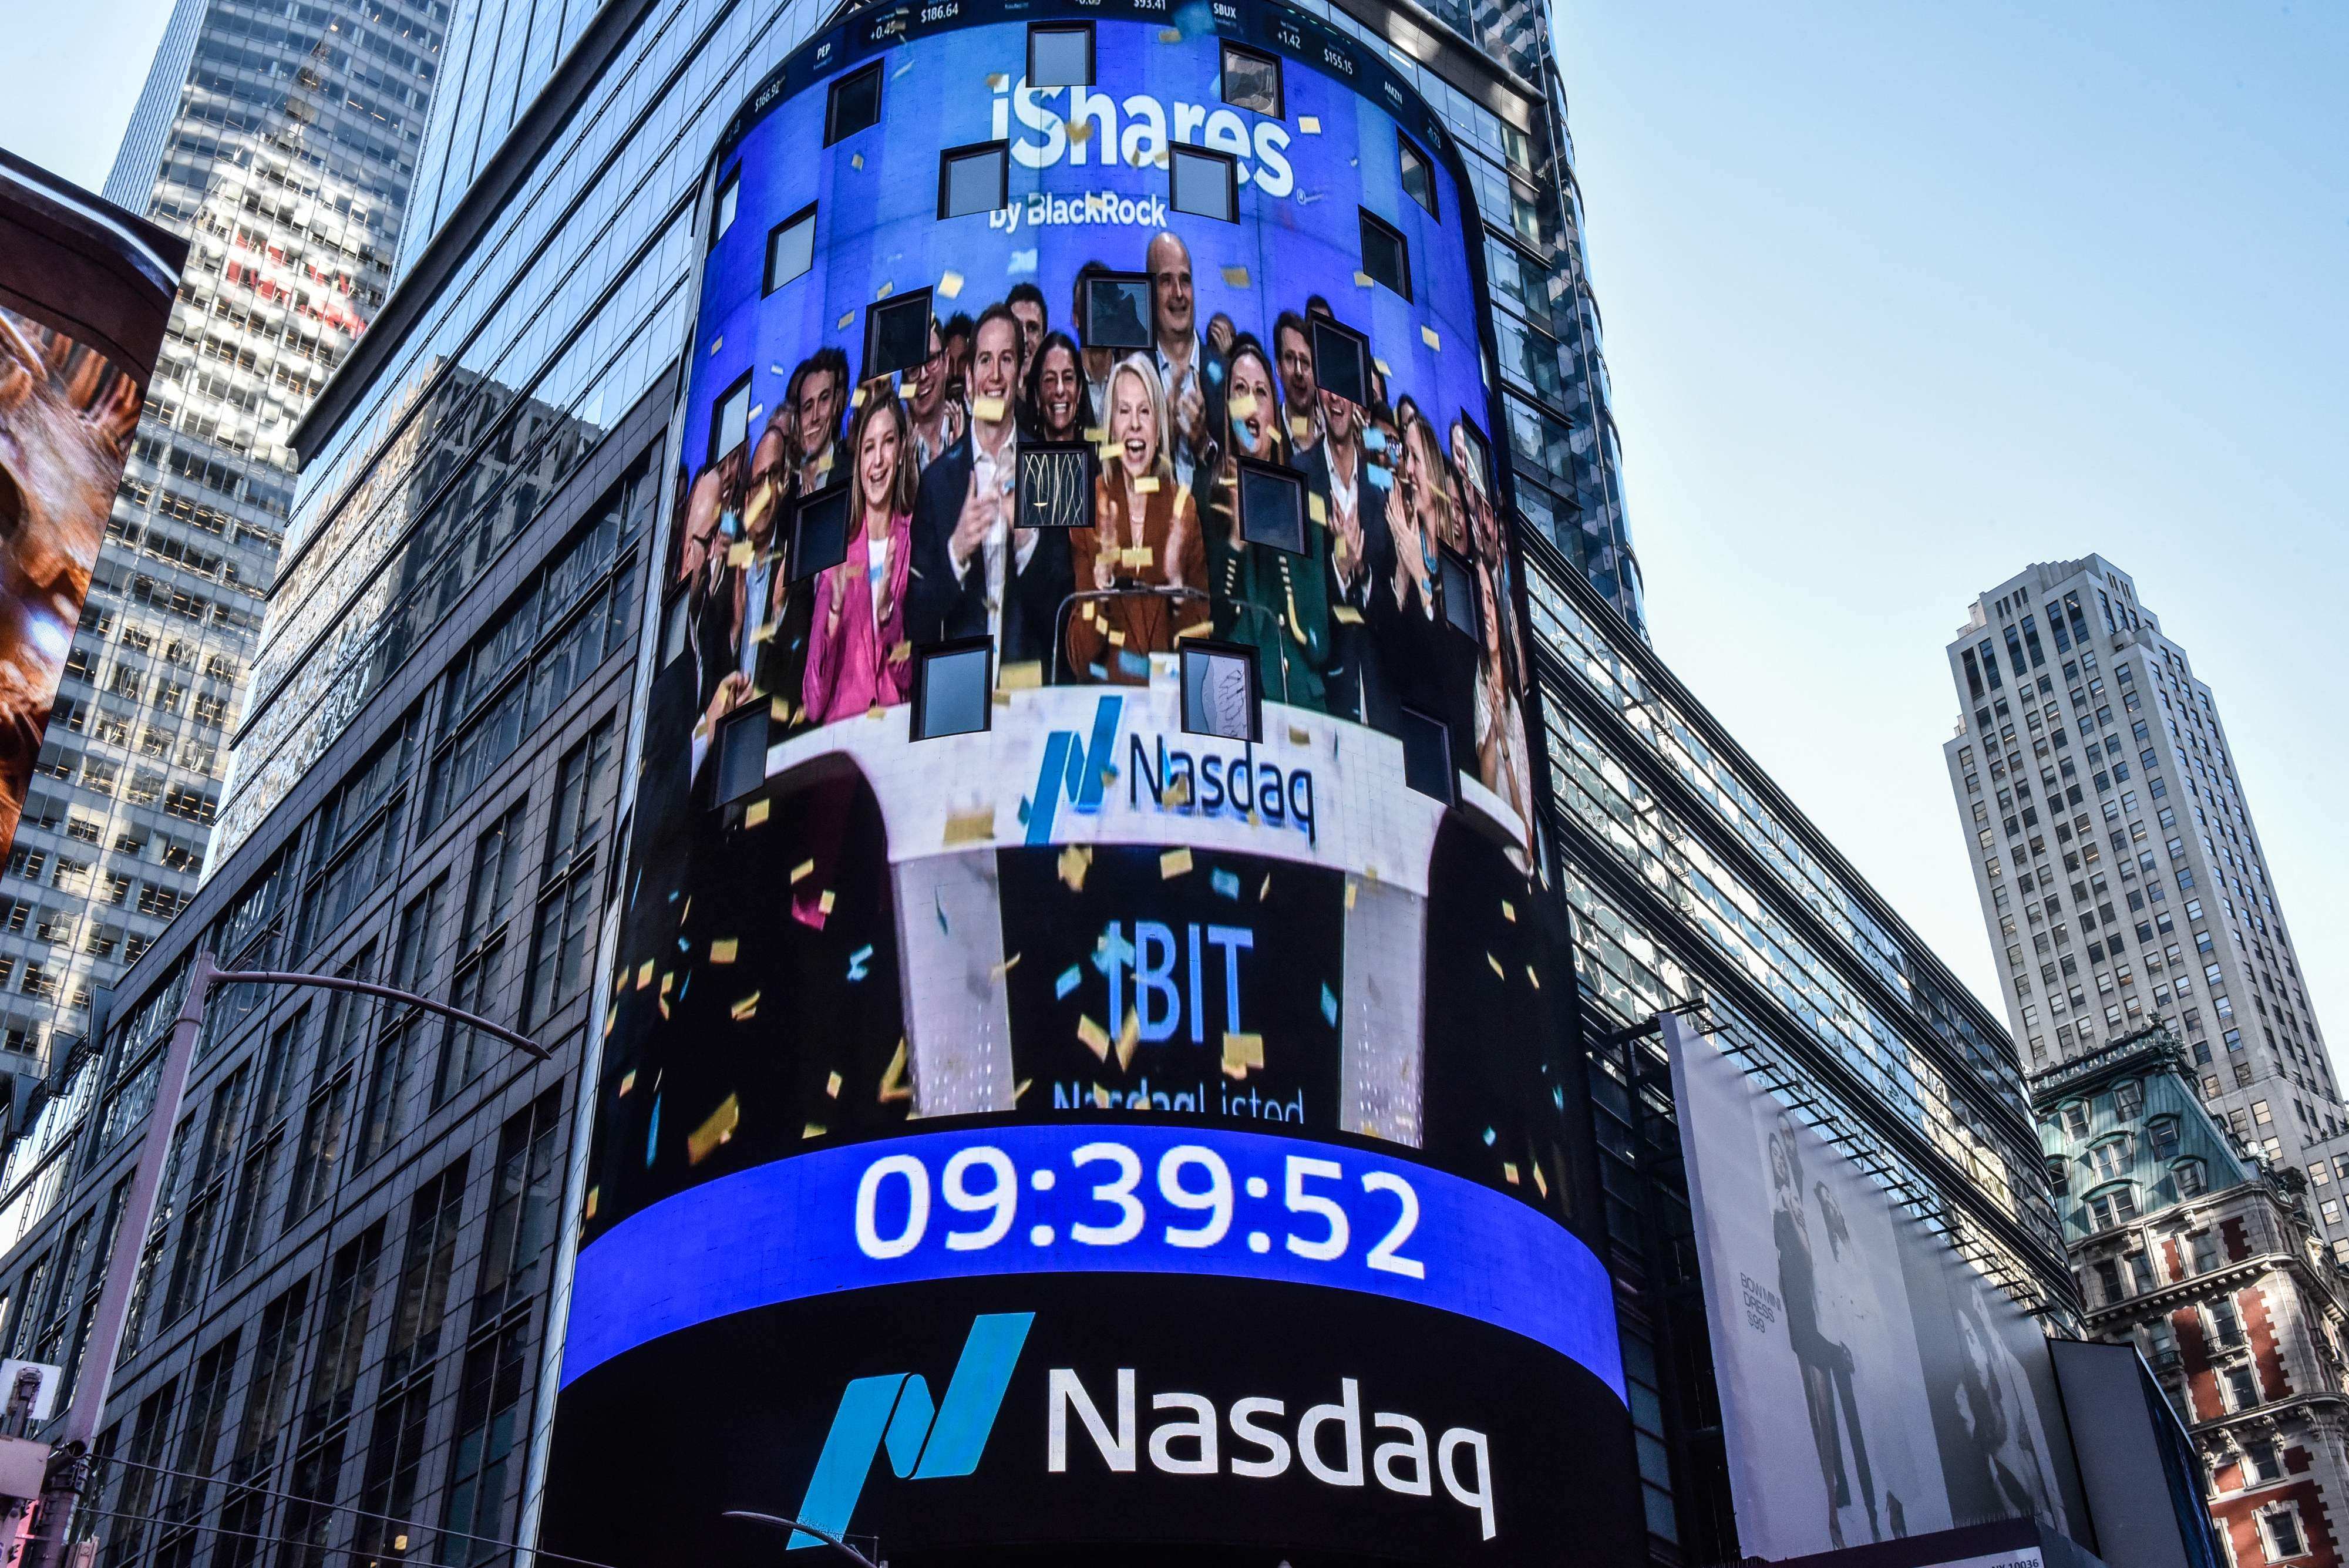 The Nasdaq board in Times Square displays scenes from the launches of spot bitcoin ETFs  in New York on January 11. Photo: AFP 